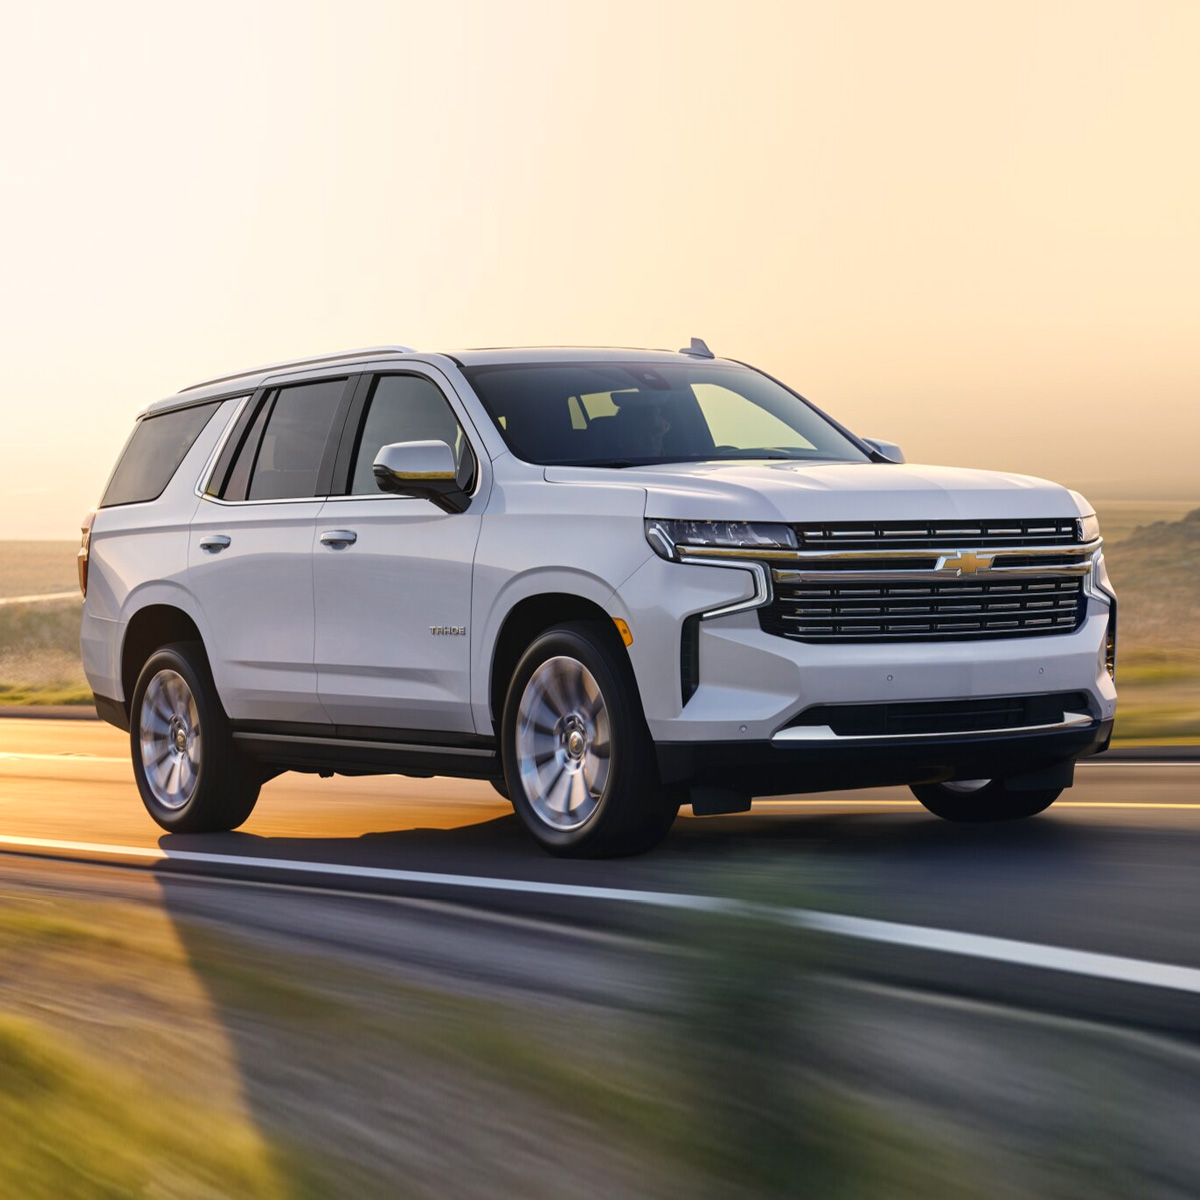 The 2021 Chevy Tahoe